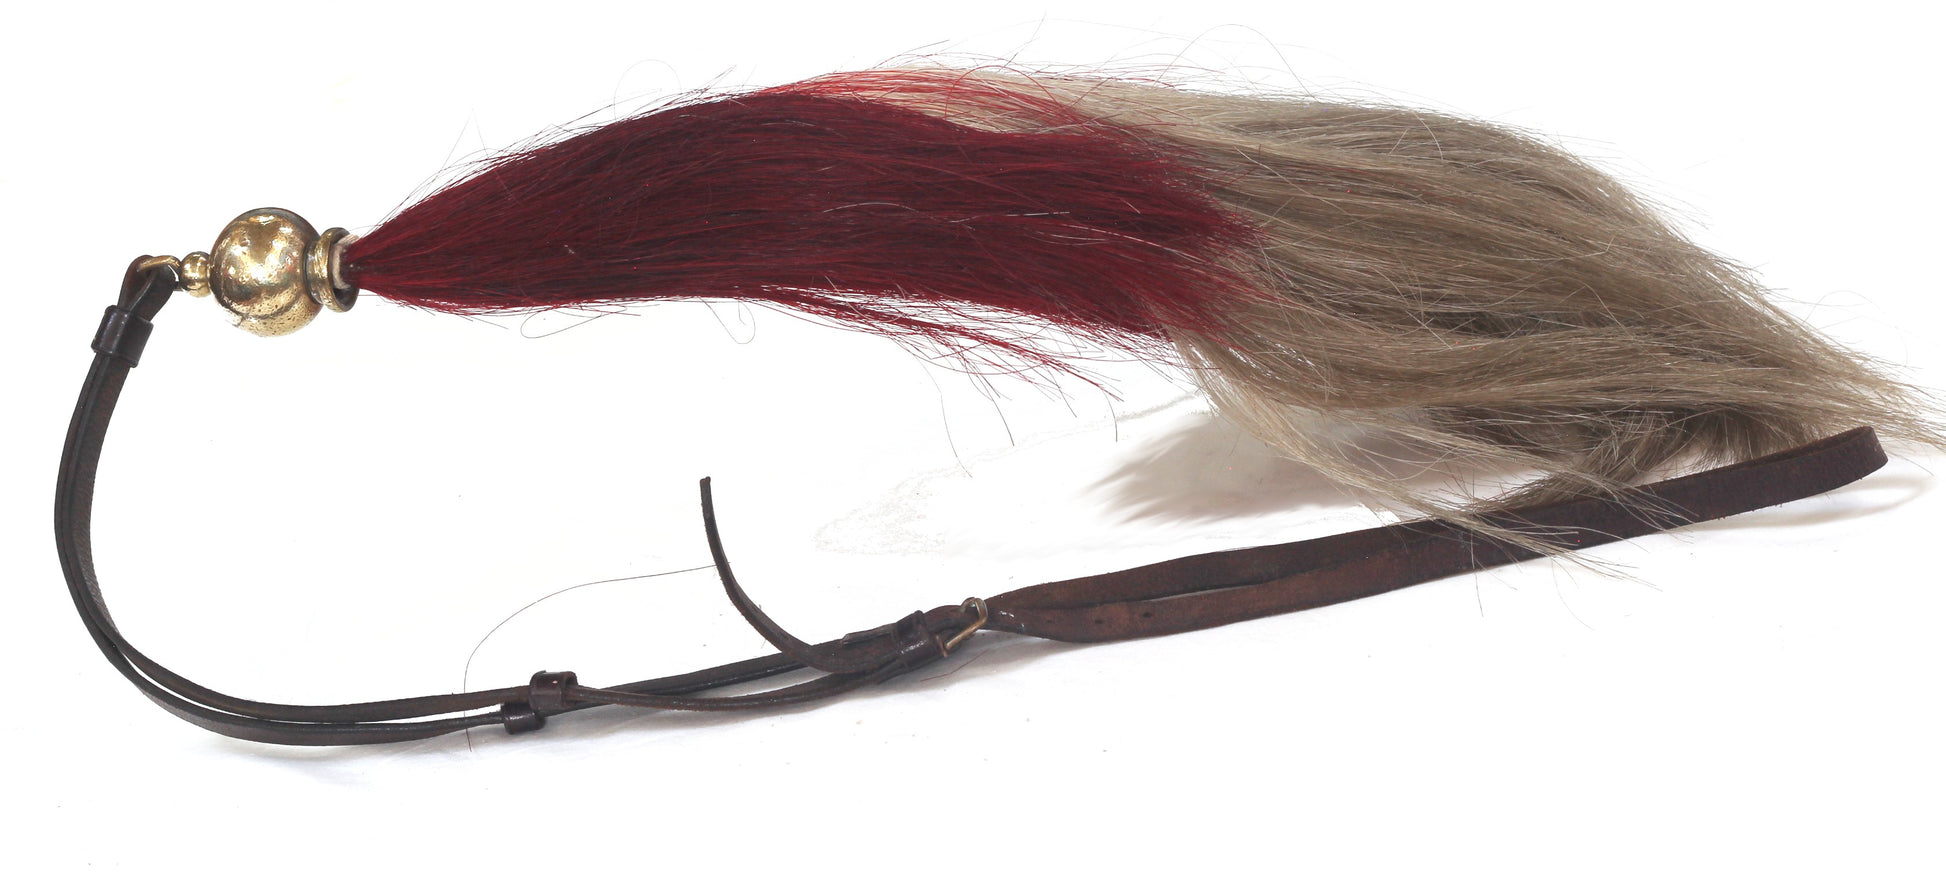 A Maroon & White Throat Plume or Beard for an Officer's Horse